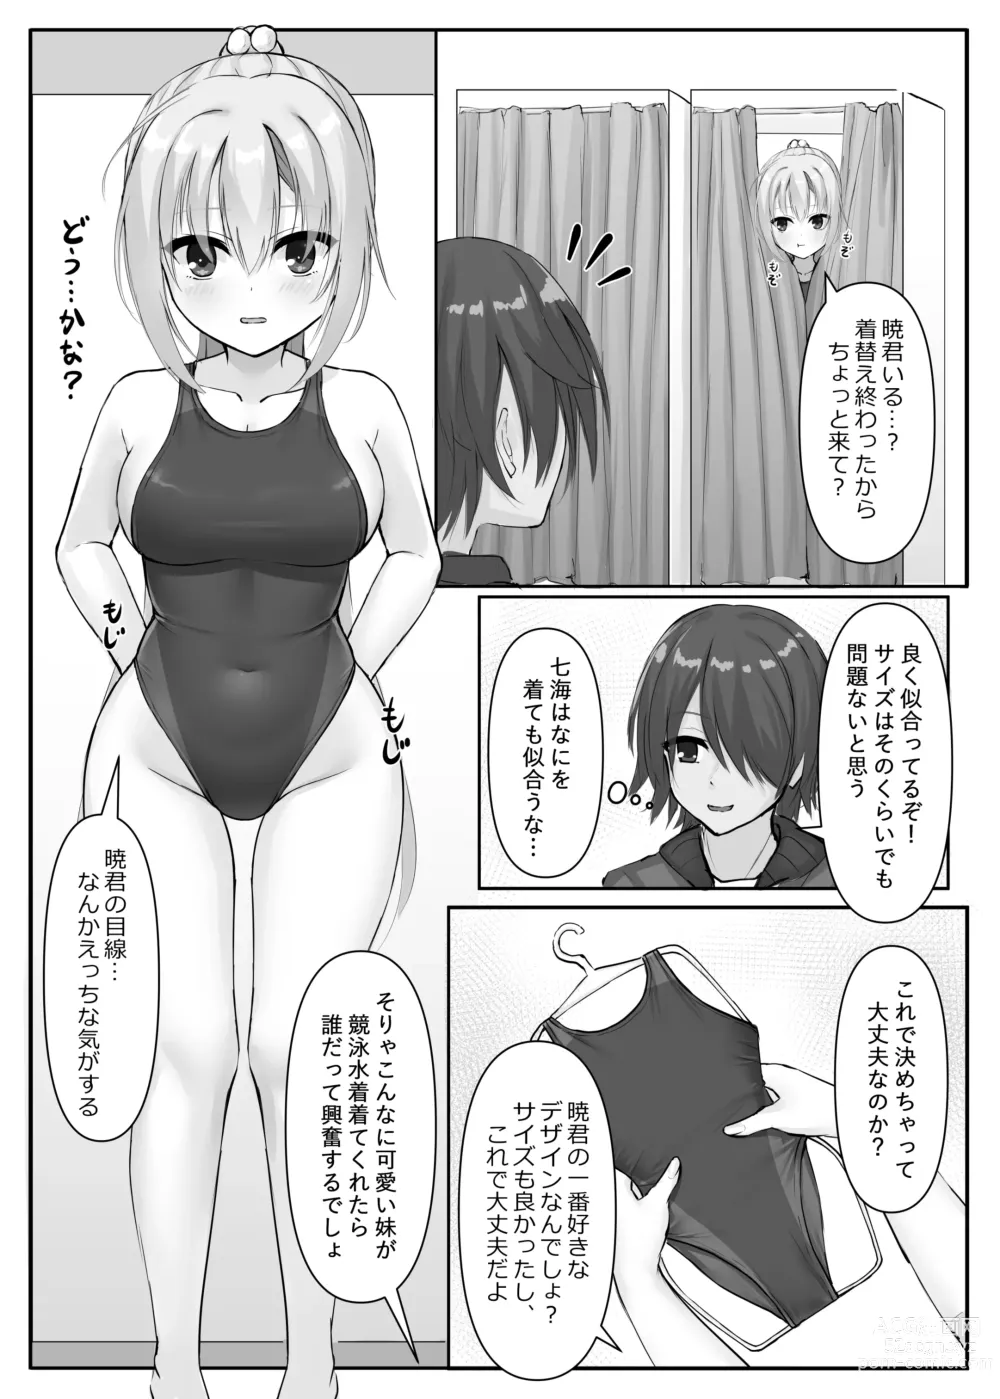 Page 6 of doujinshi Competition Swimsuit Nanami